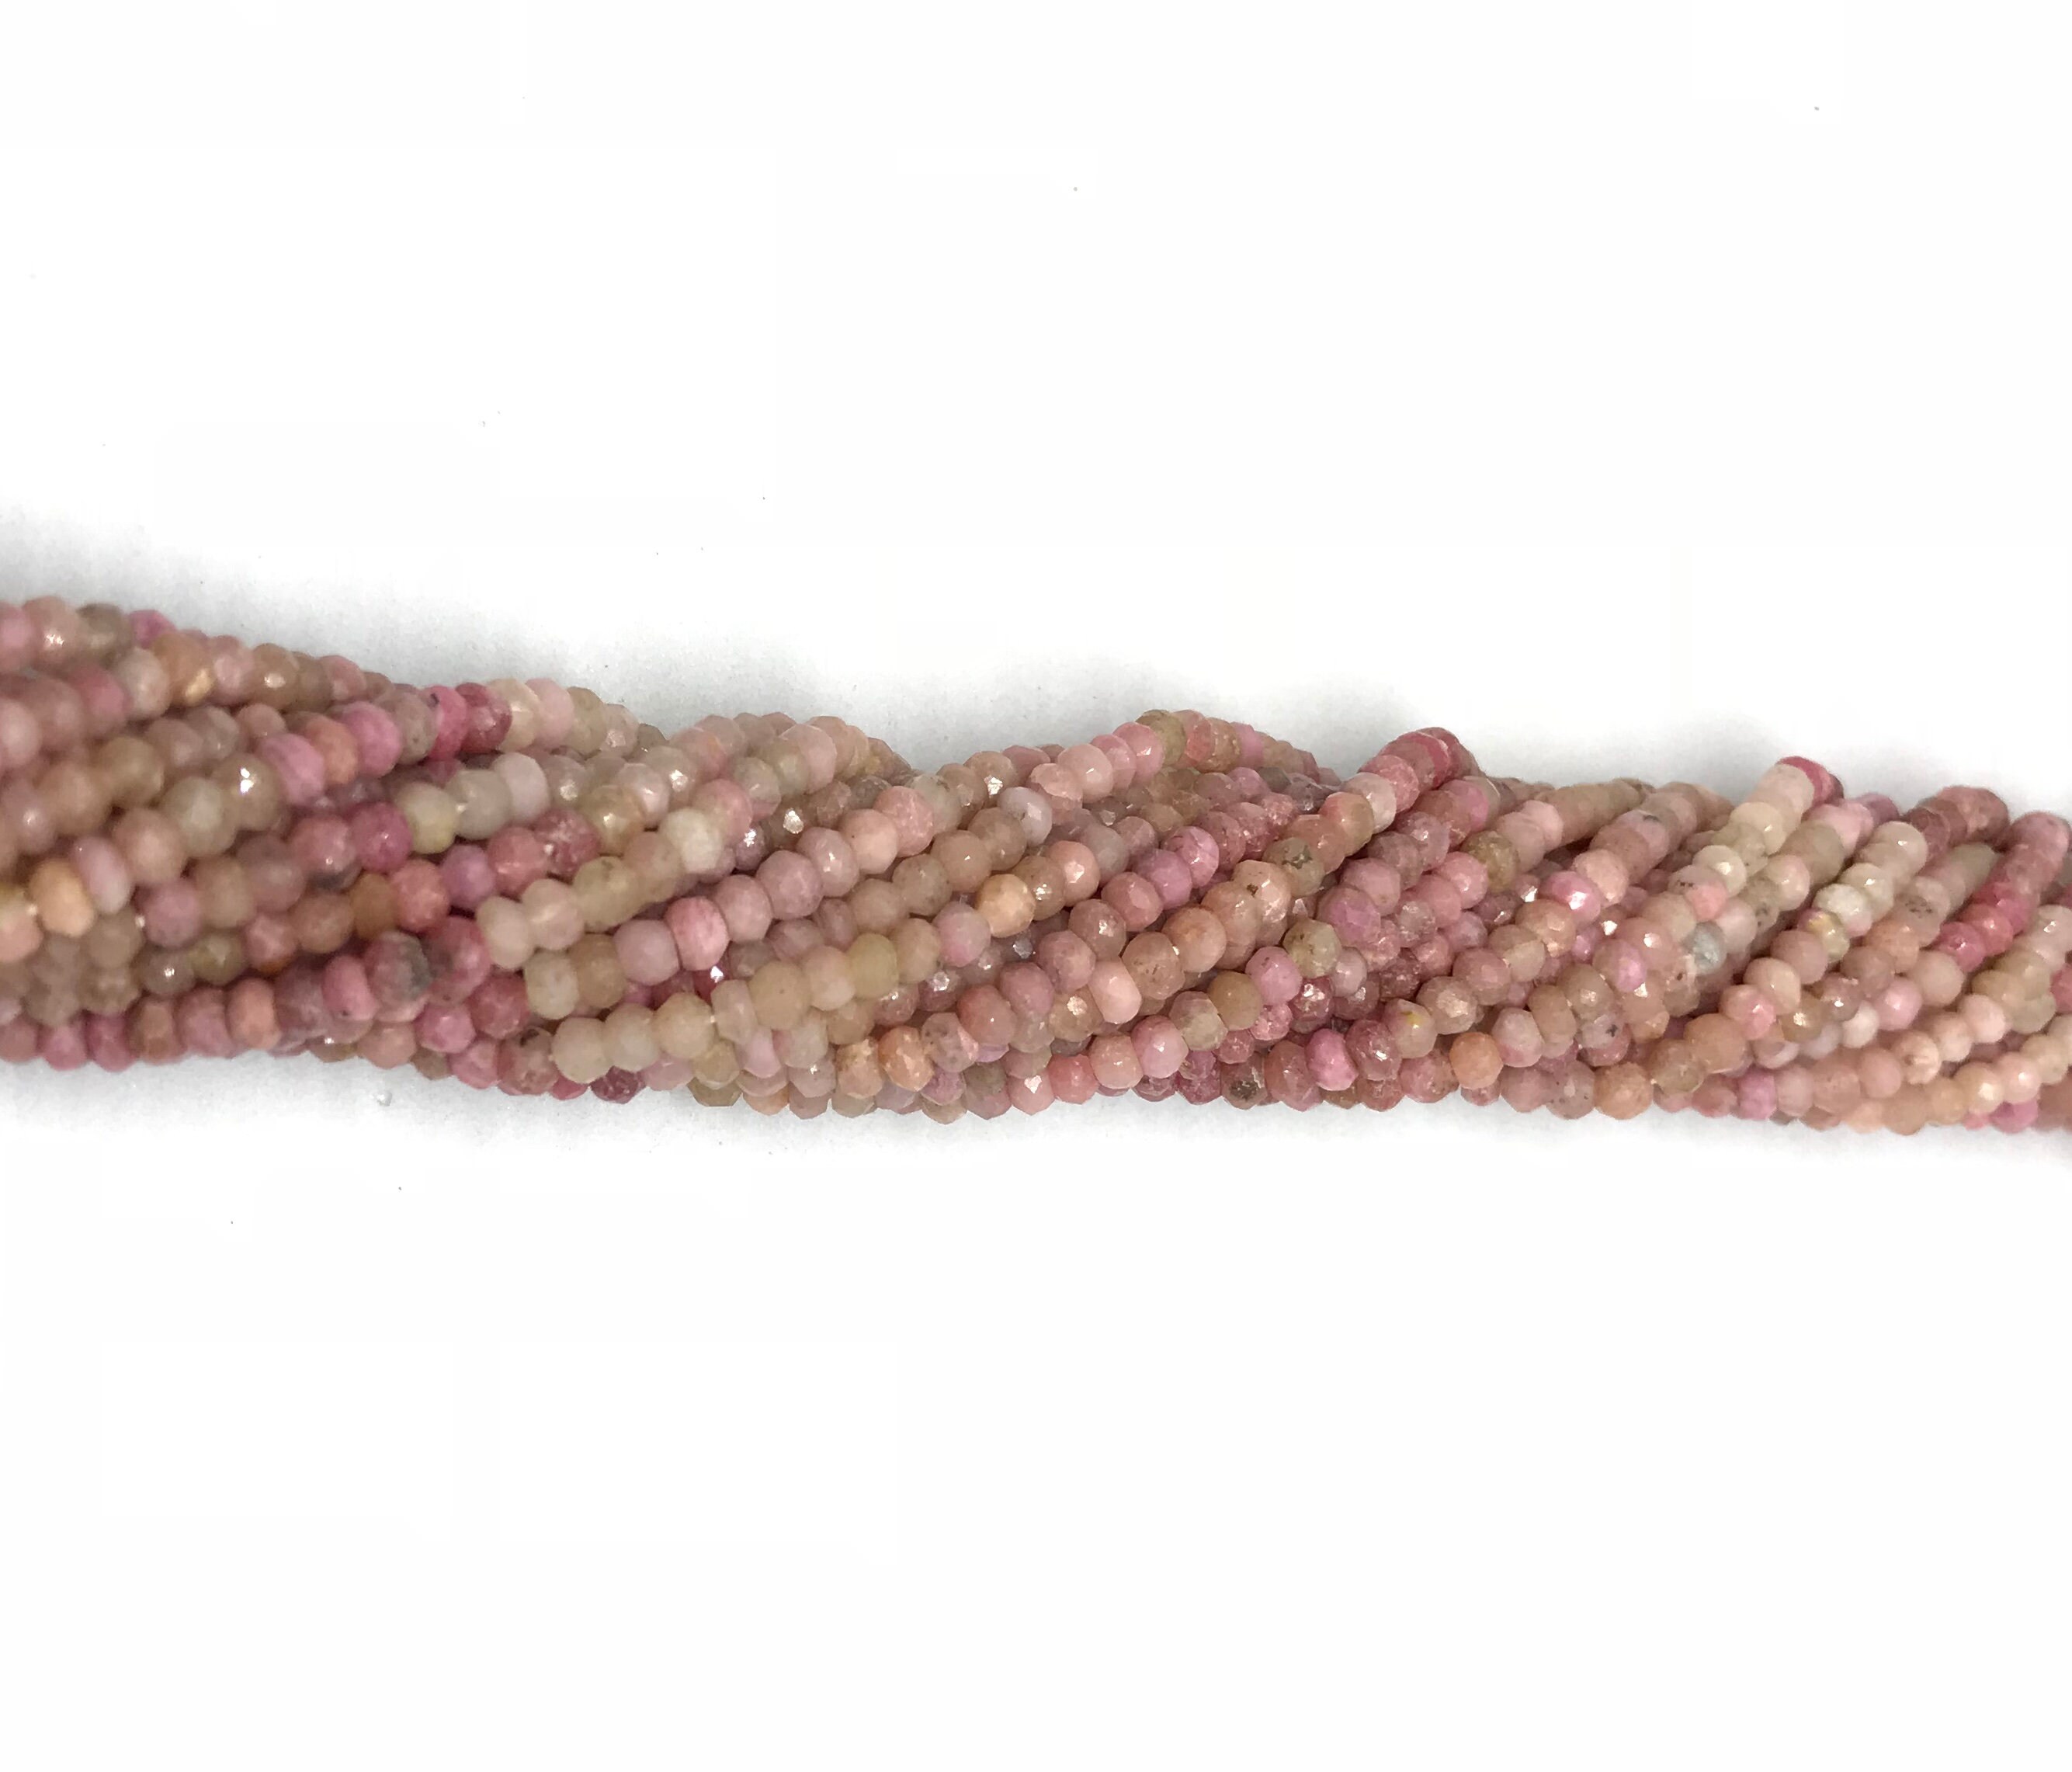 3 mm Natural Rhodochrosite Faceted Round Rondelle Beads 33 cm Strand EB-63 